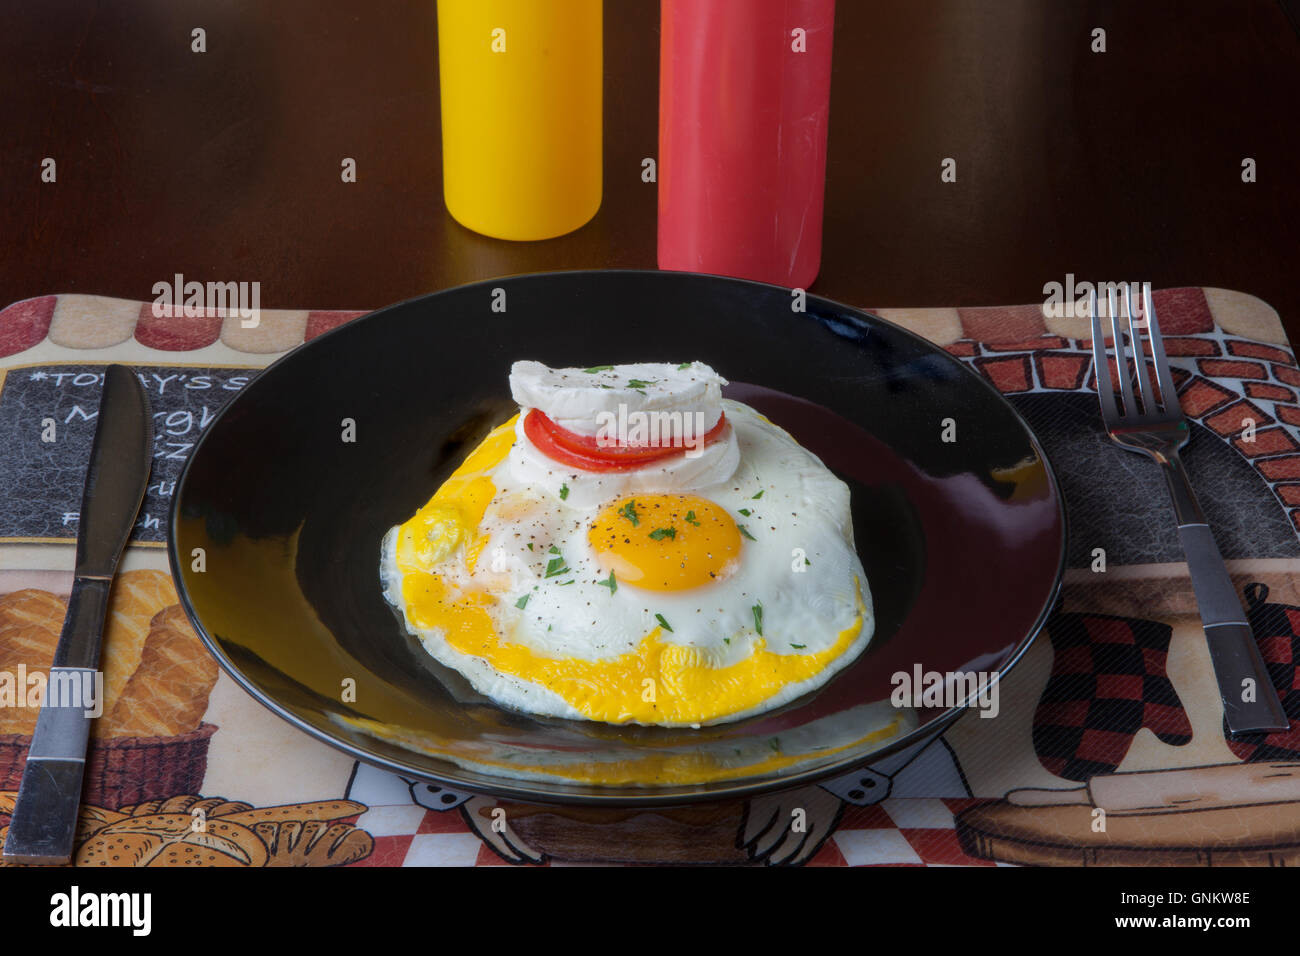 Fried Eggs, breakfast, mozzarella cheese, tomato, ketchup, mustard squeeze bottle, black plate Stock Photo